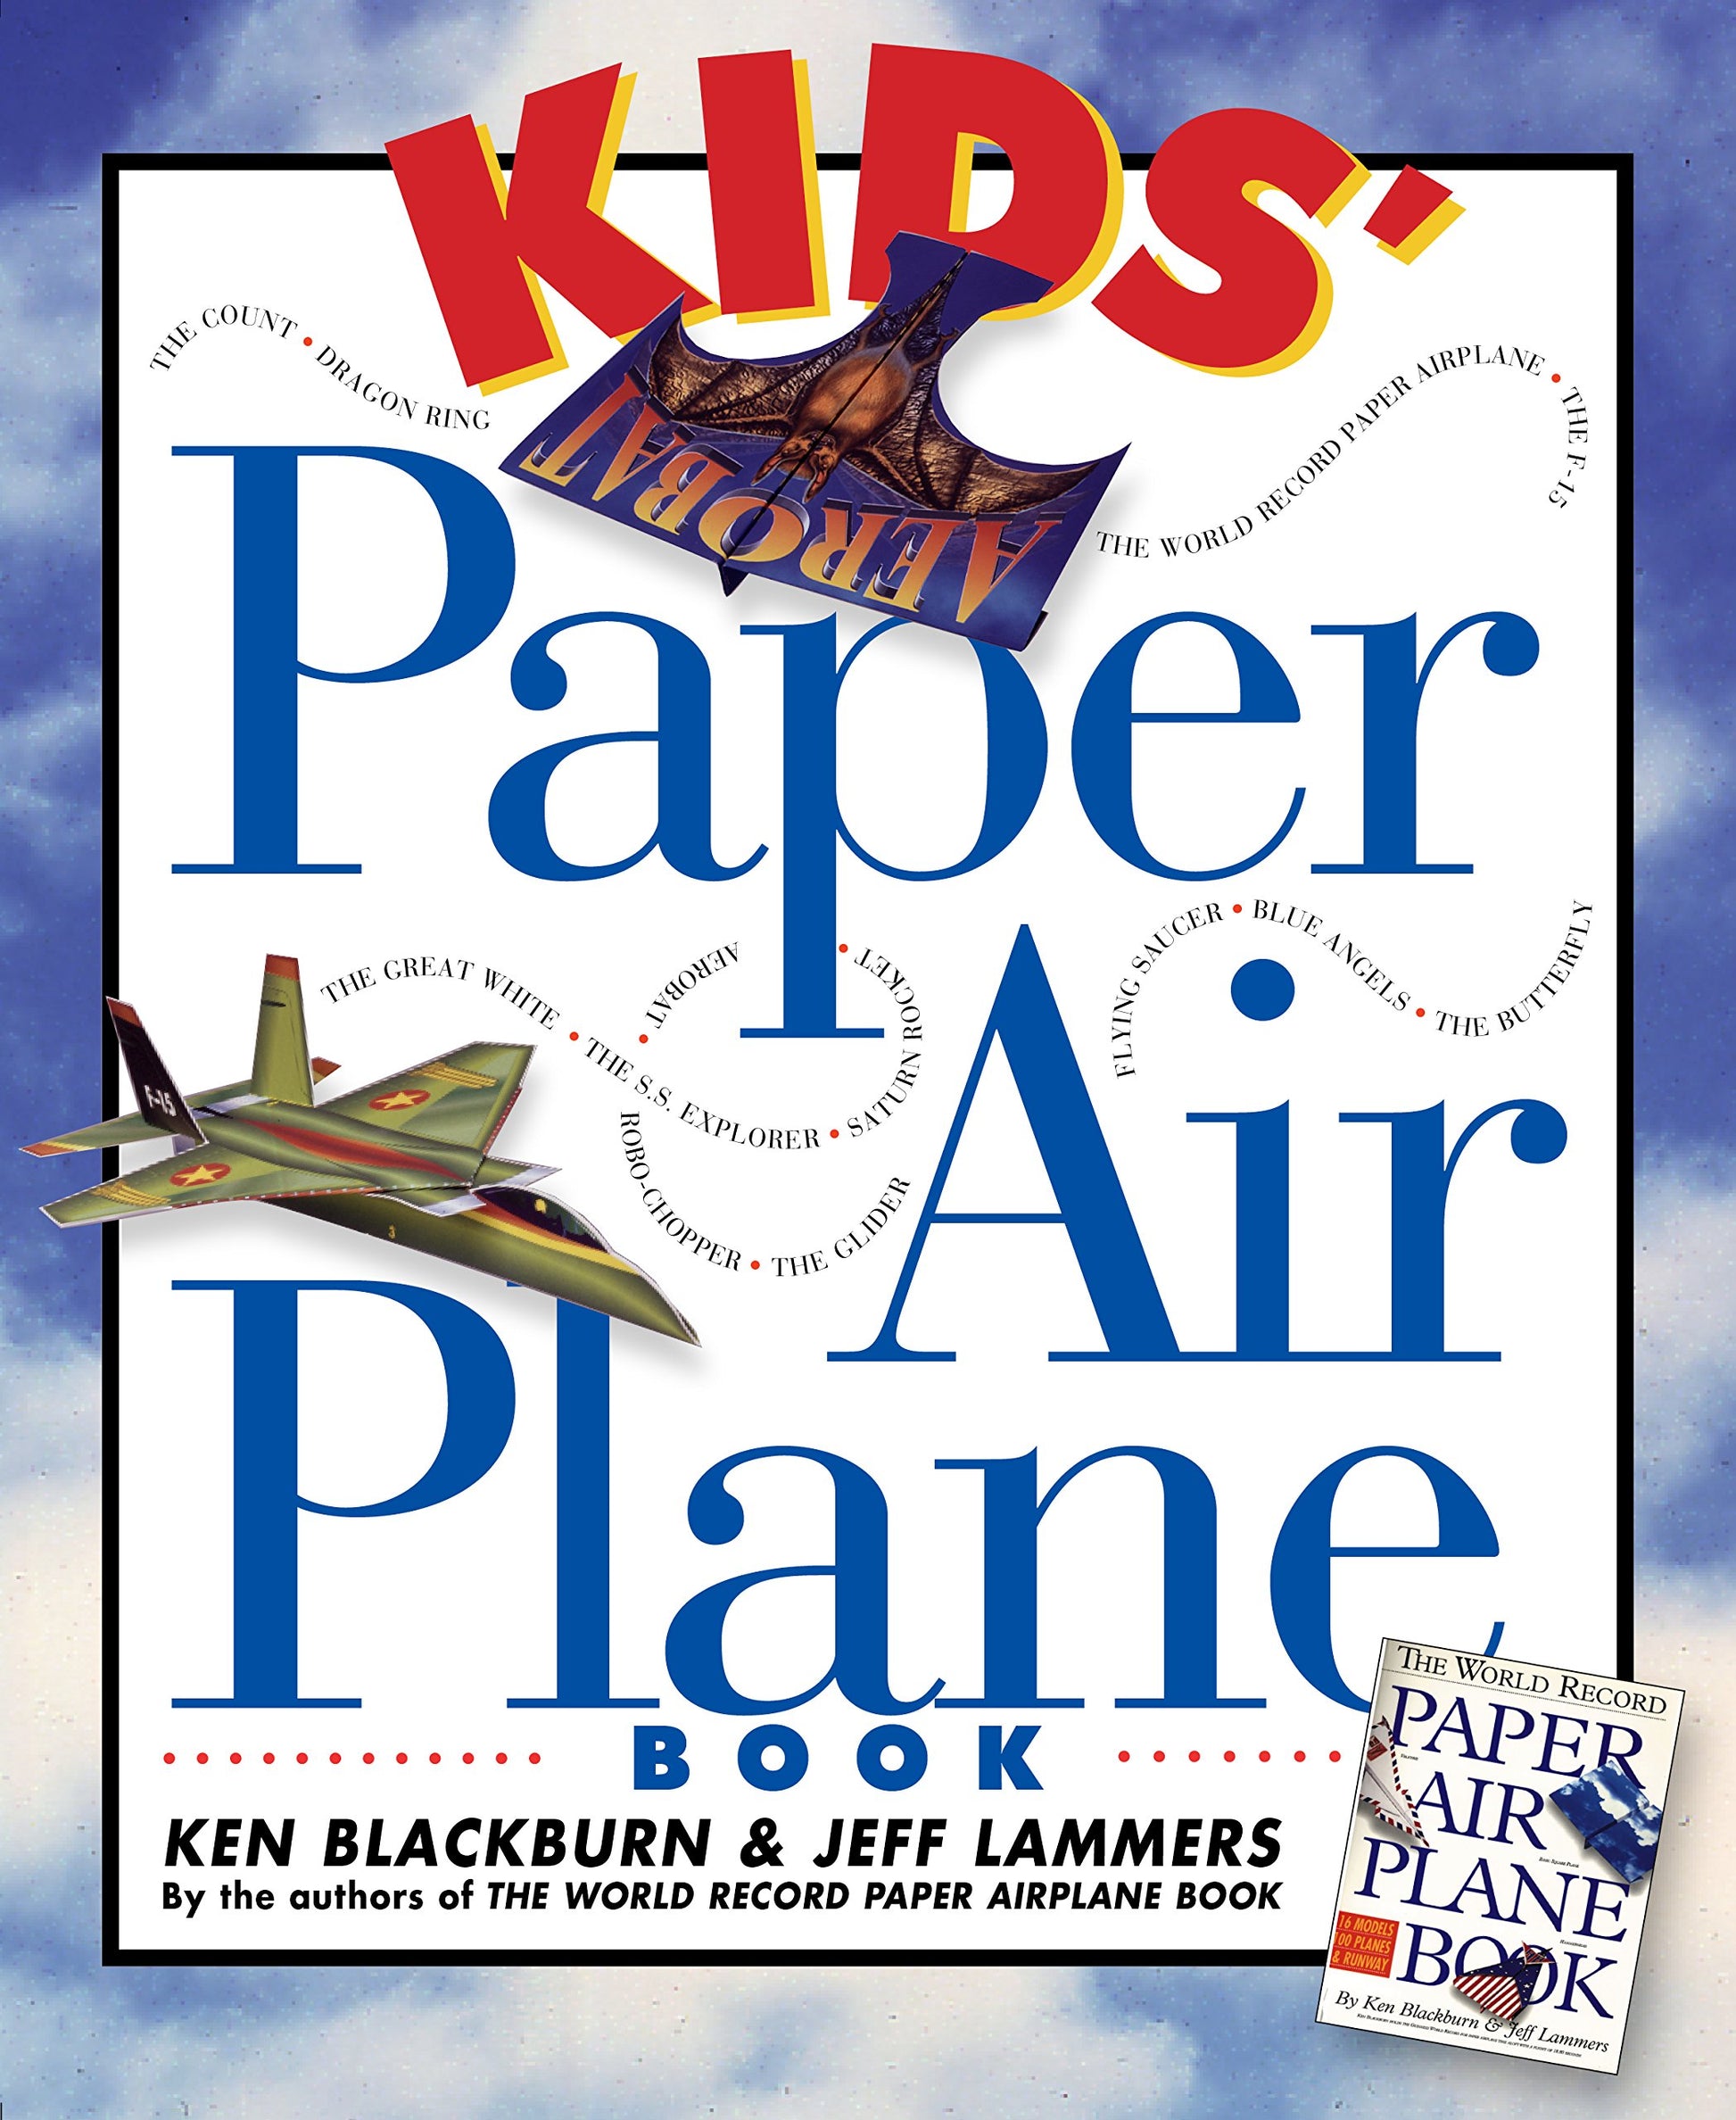 cover of book with and illustration of a fighter jet, title, and author's names